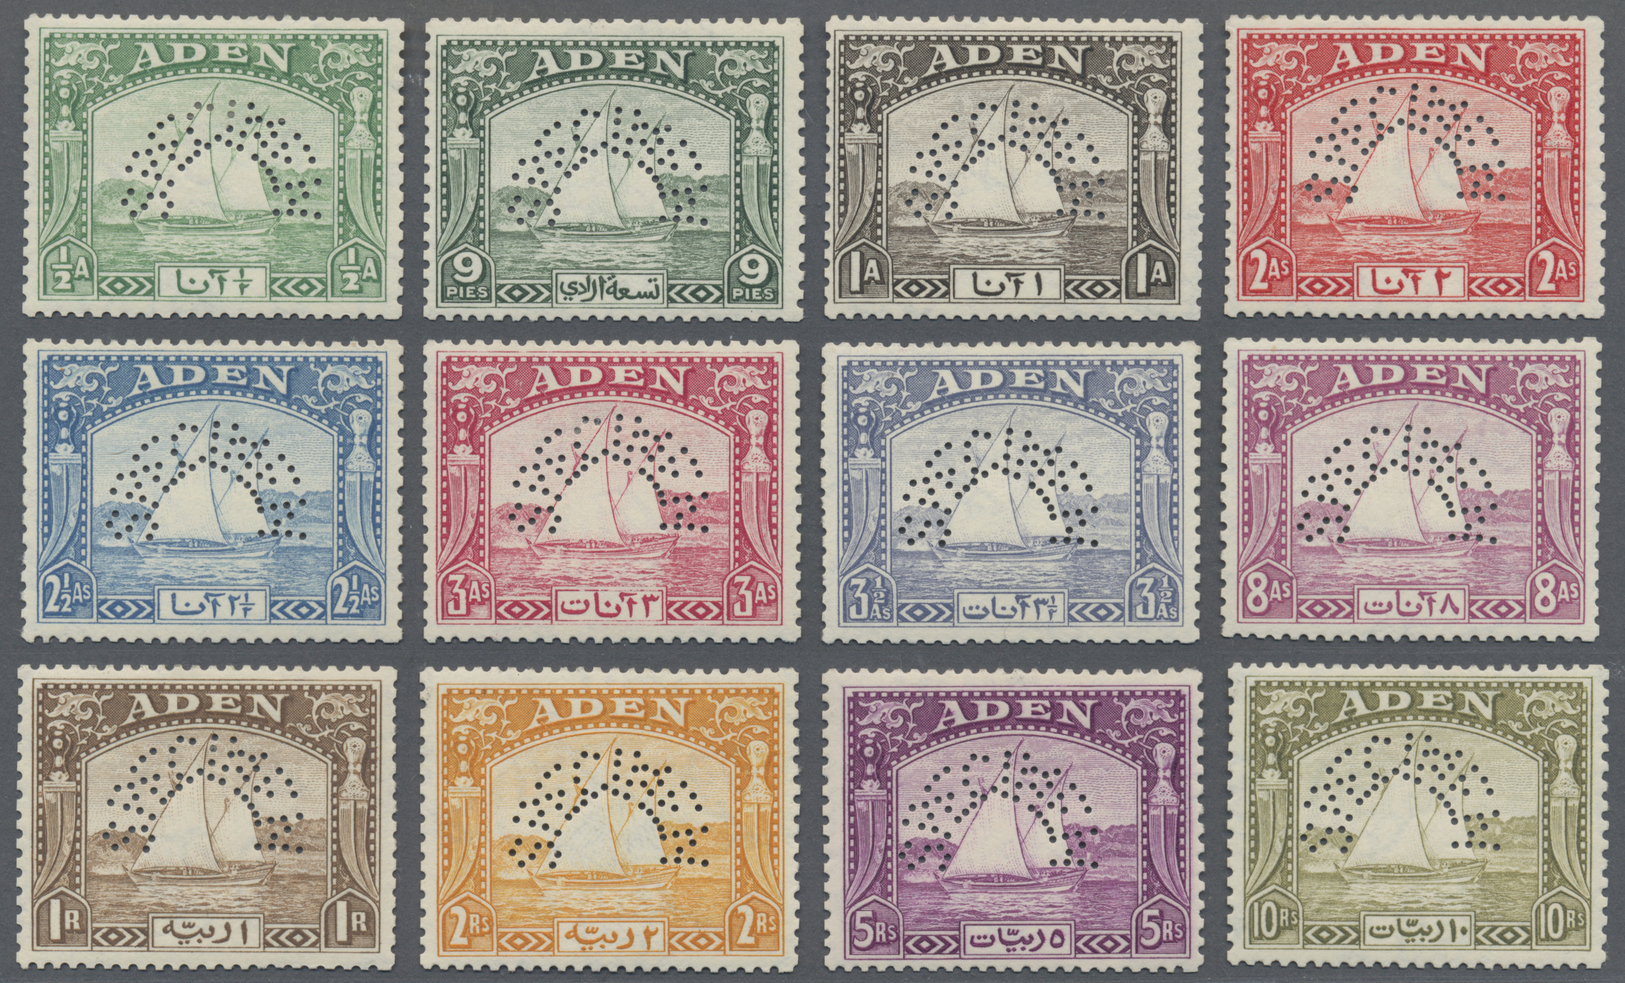 Aden: 1937 Dhows Complete Set Perforated SPECIMEN, Mint Lightly Hinged, Fresh And Very Fine. (SG £800) - Yémen